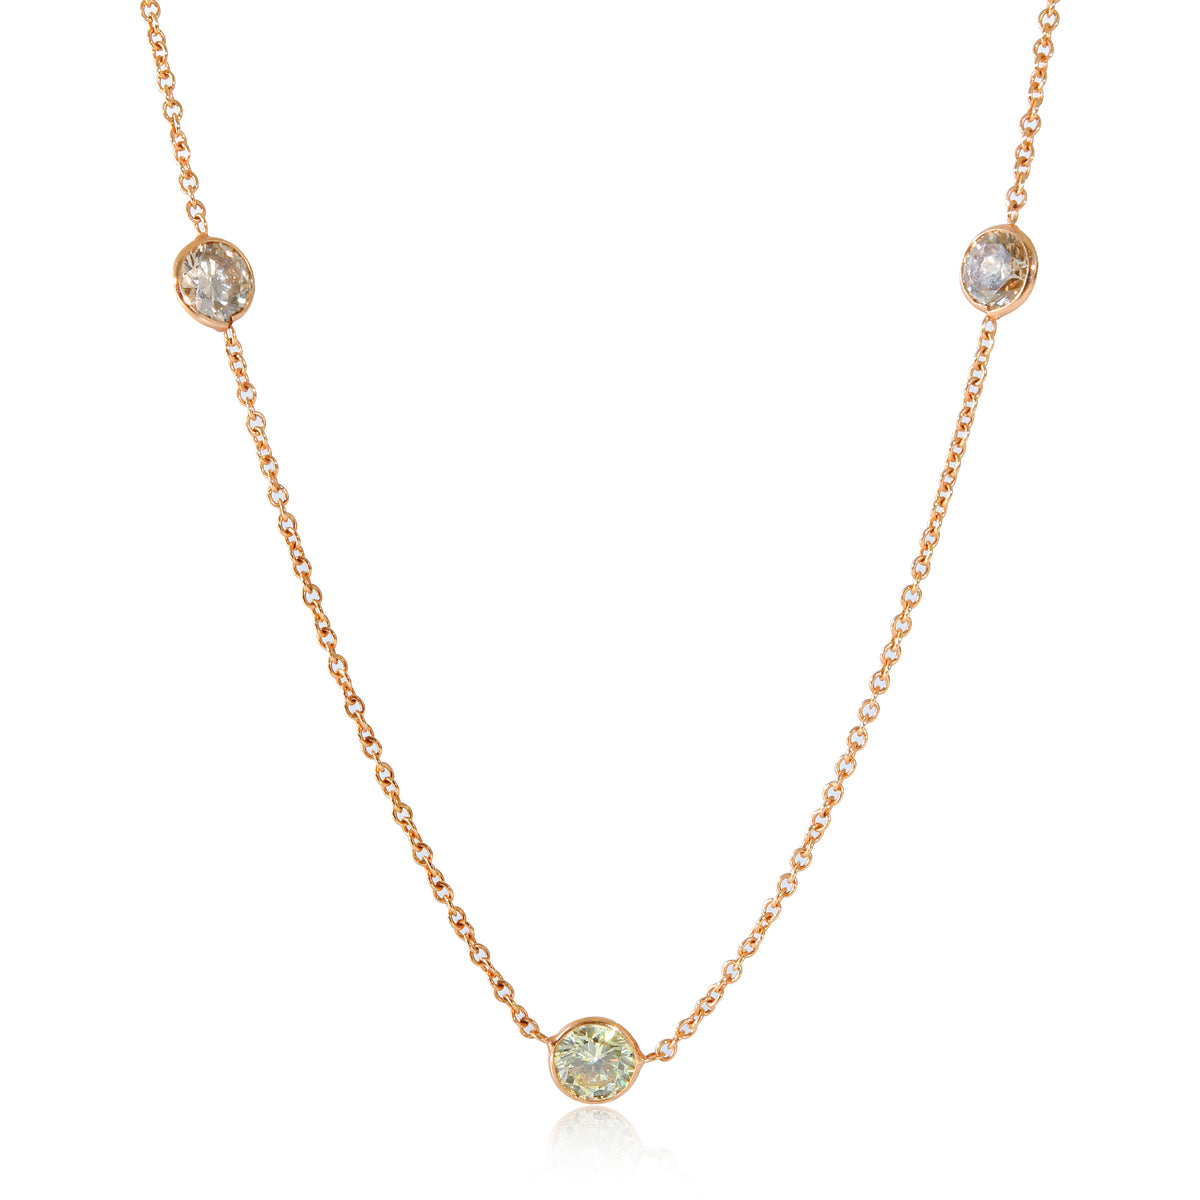 Fancy Brown Diamond by the Yard Necklace in 14KT Gold 4.35CTW